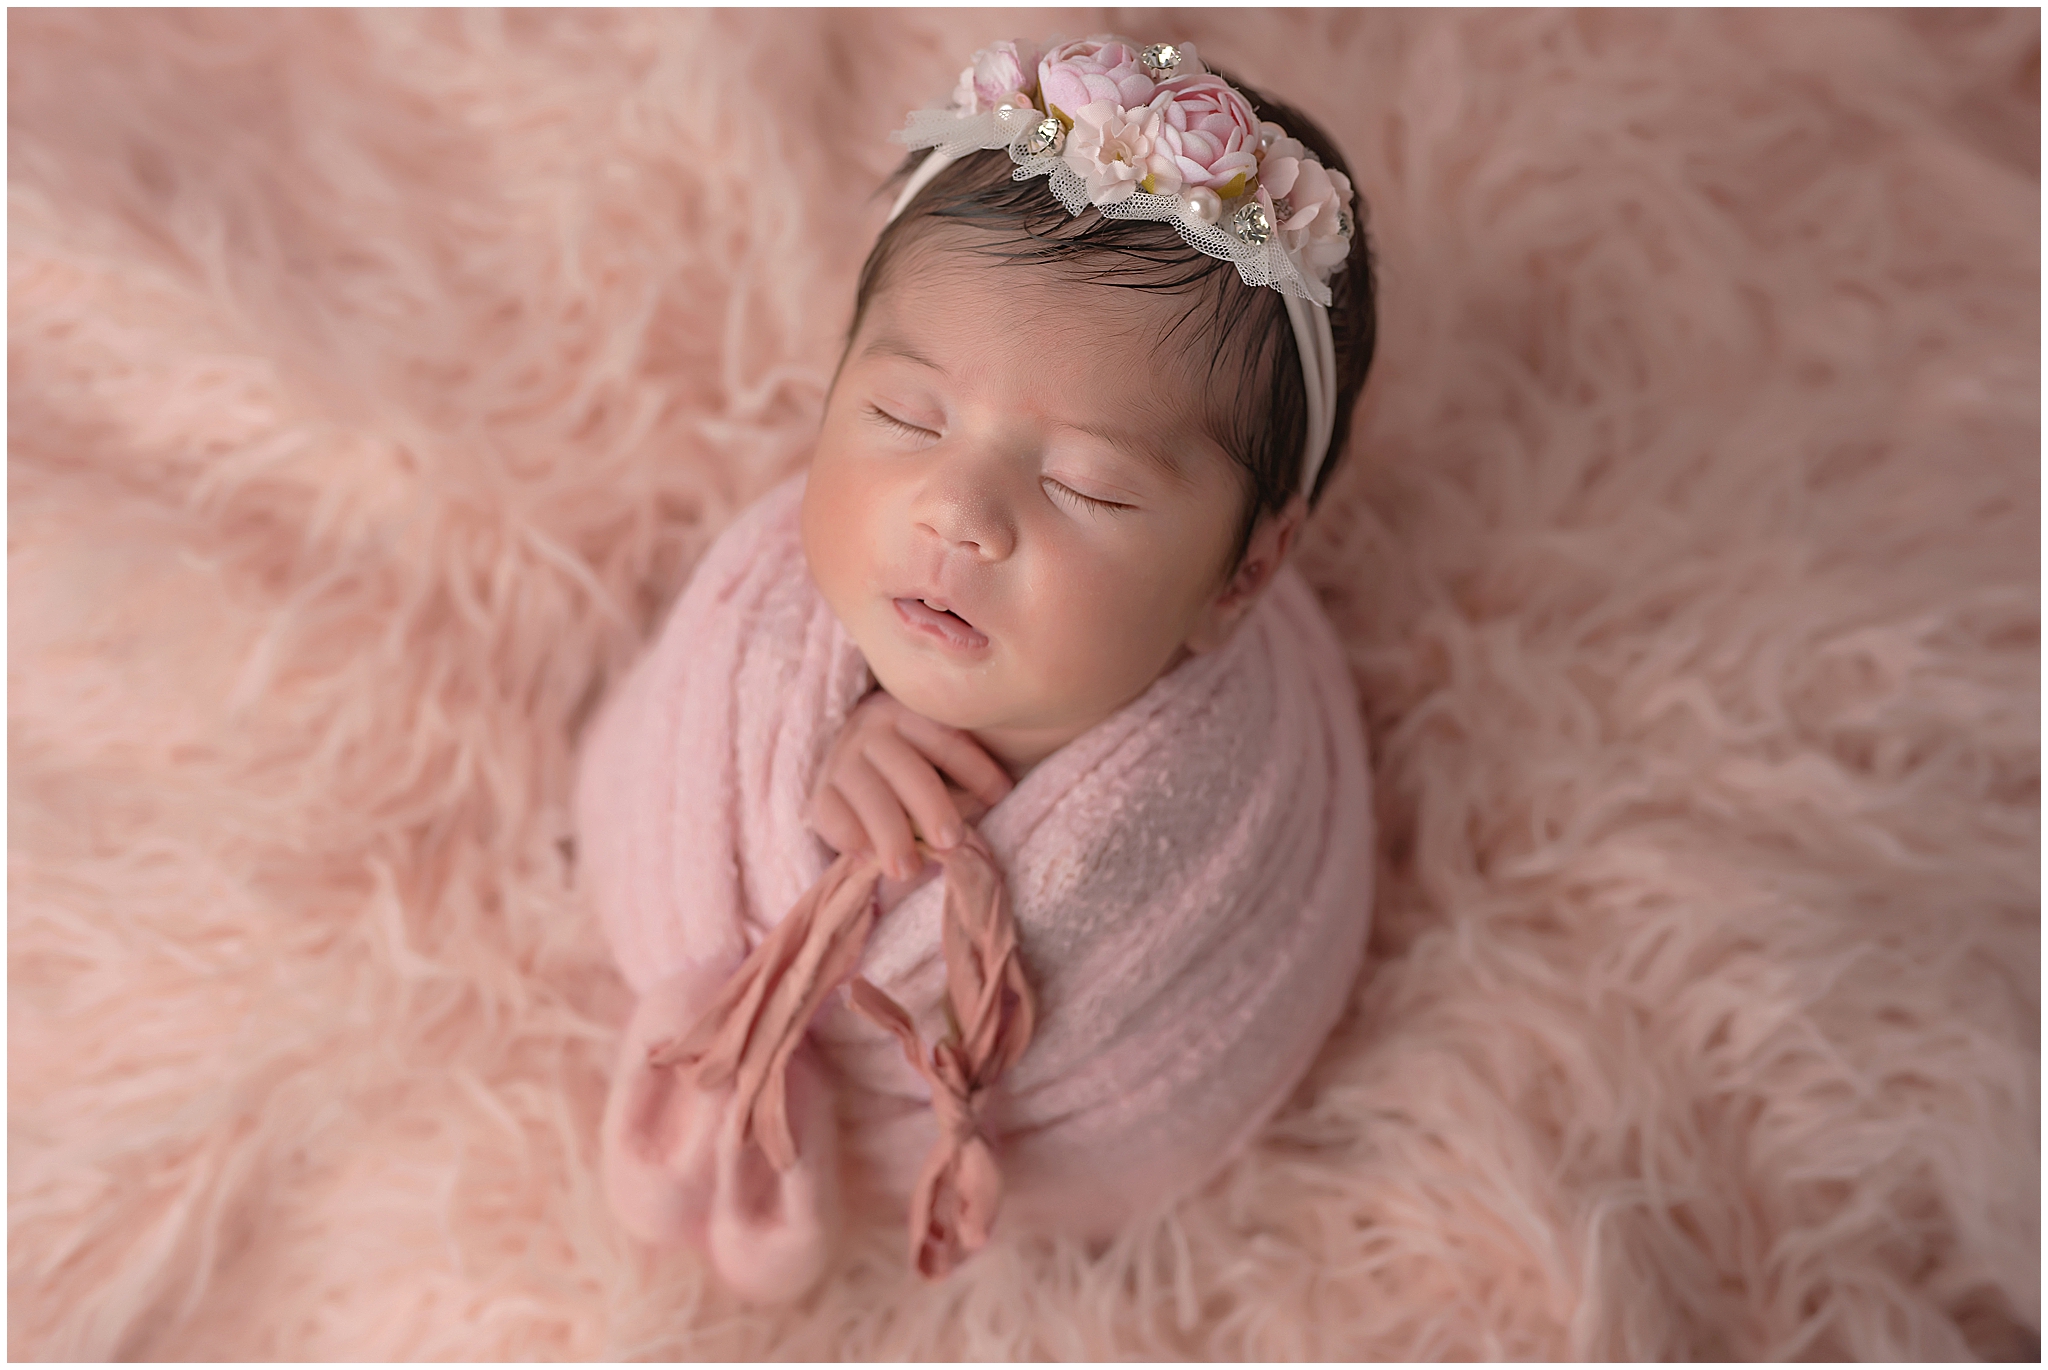 baby girl holding ballet slippers during newborn photography session at studio in london ontario